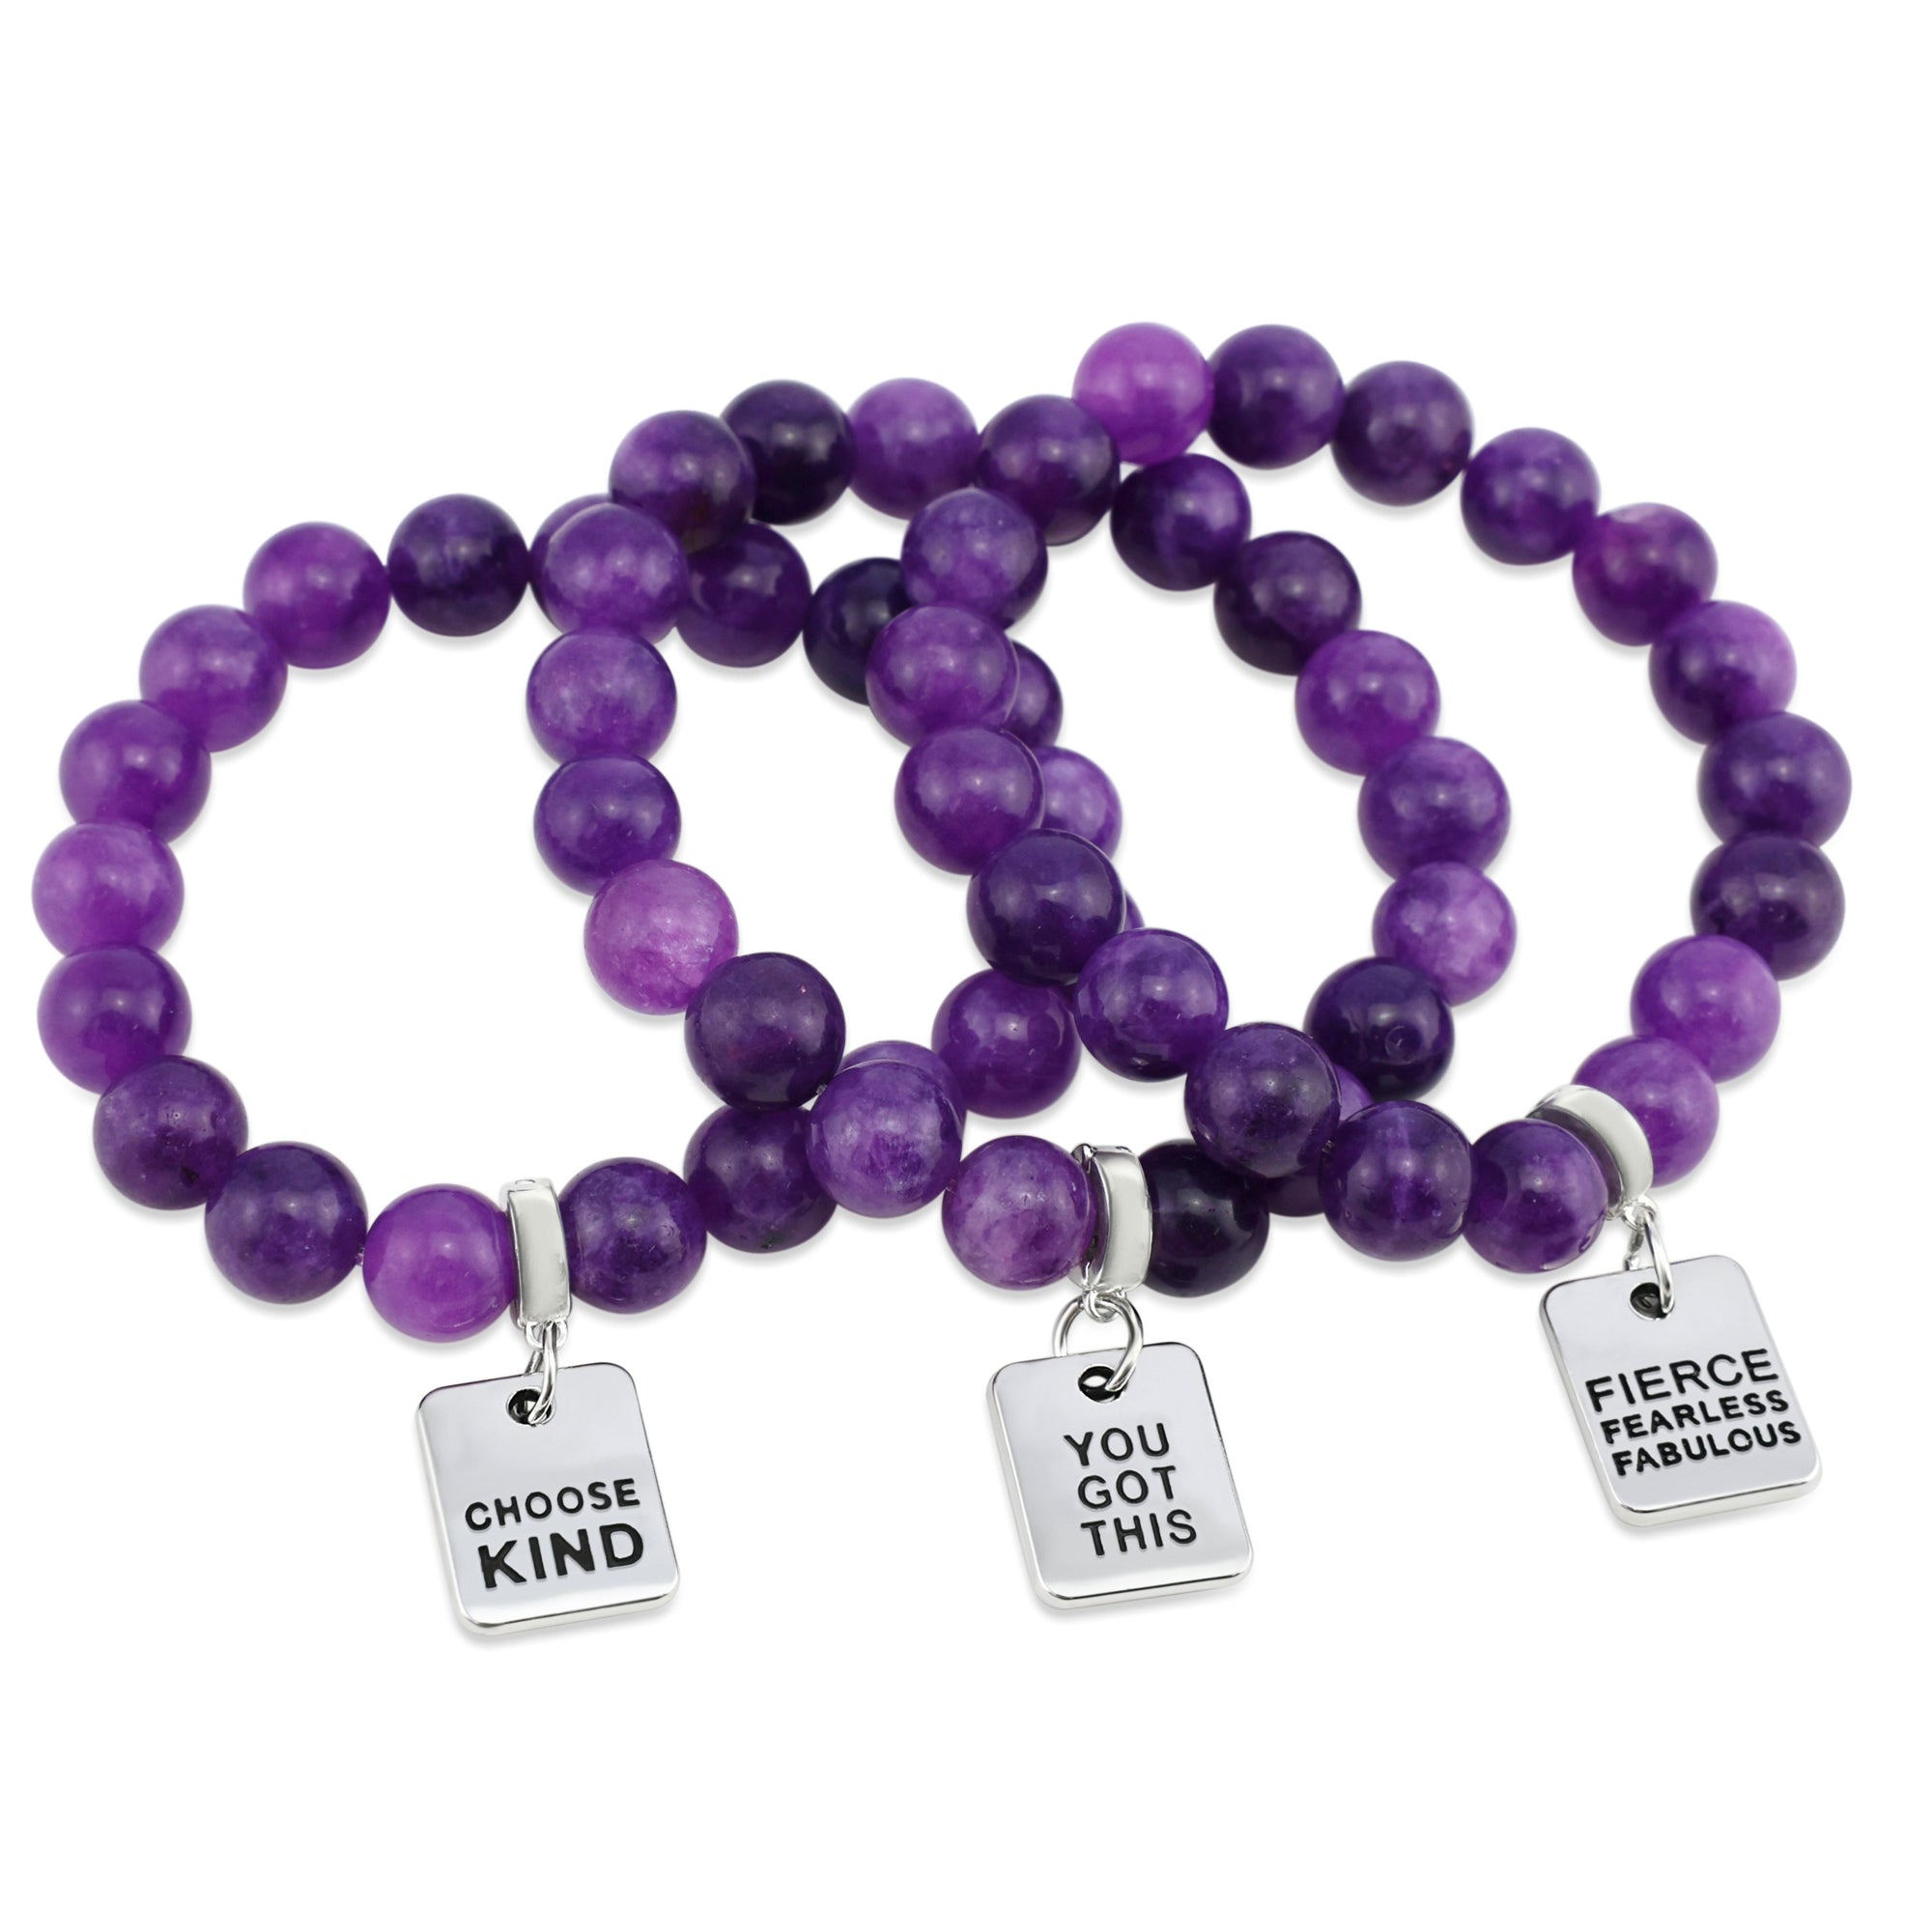 Stone Bracelet - Purple Paradise Agate 10mm Beads - with Silver Word Charm